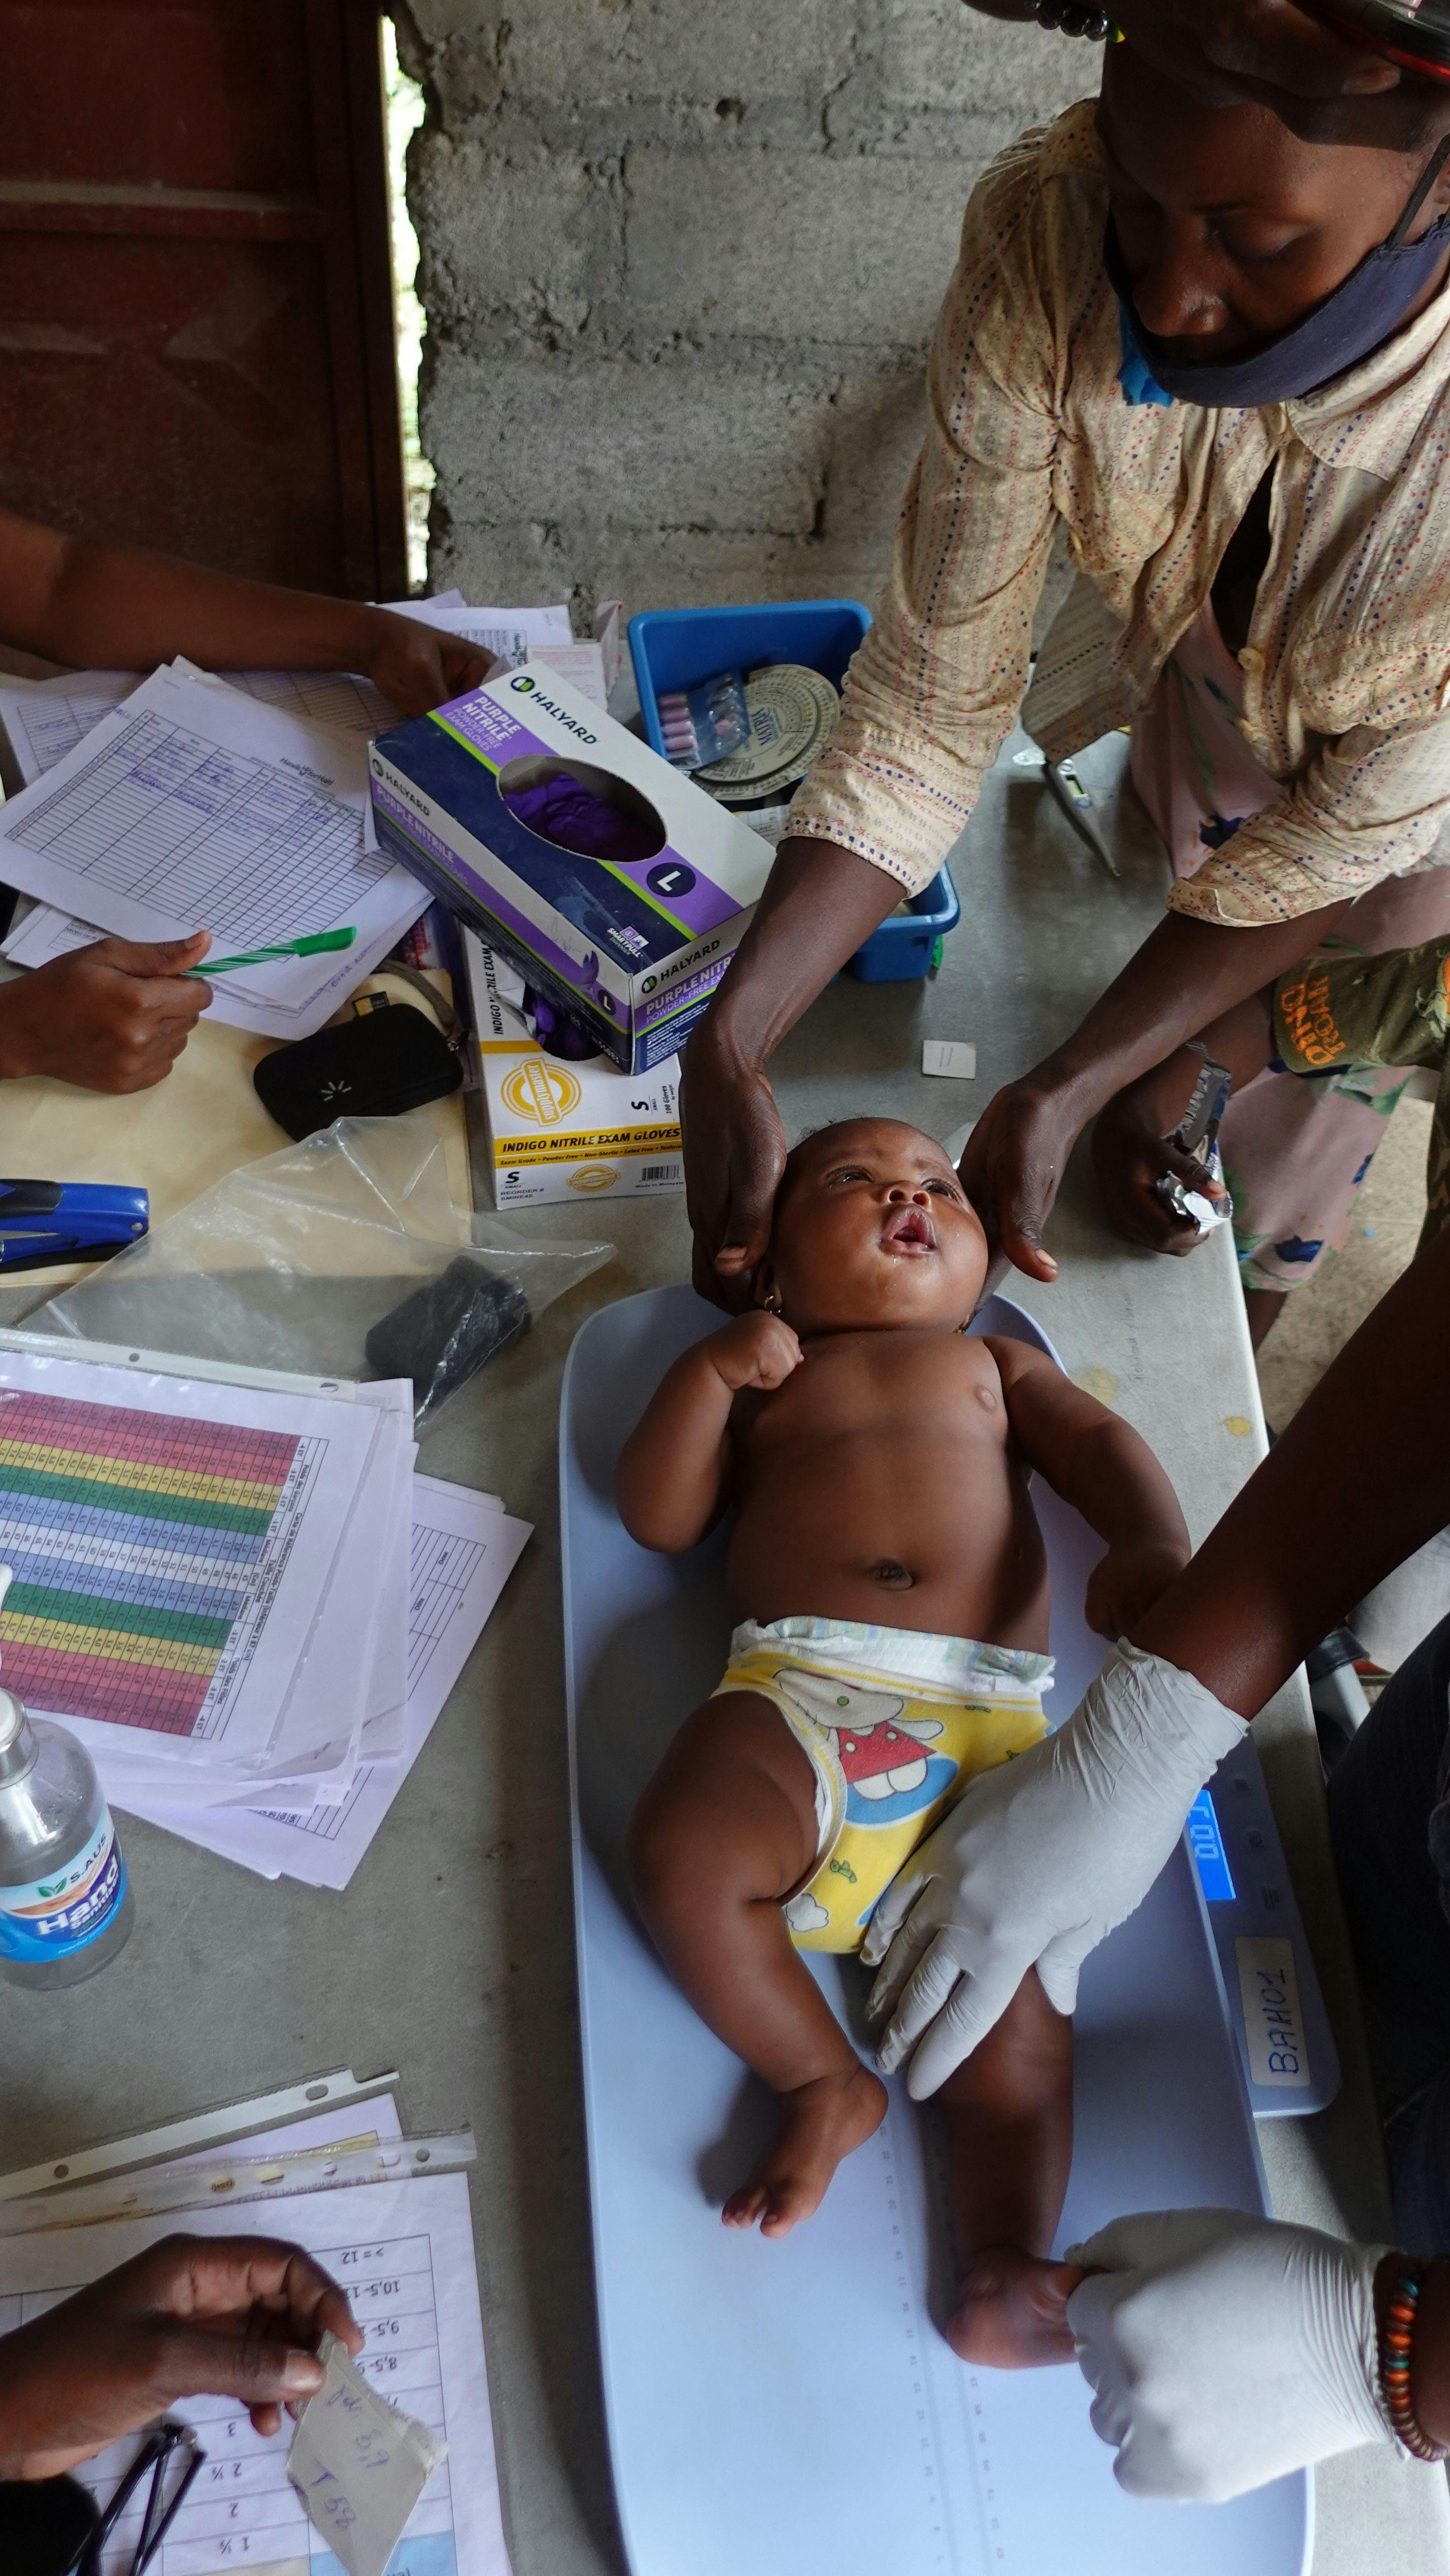 Baby receive medical checkup at clinic in Haiti